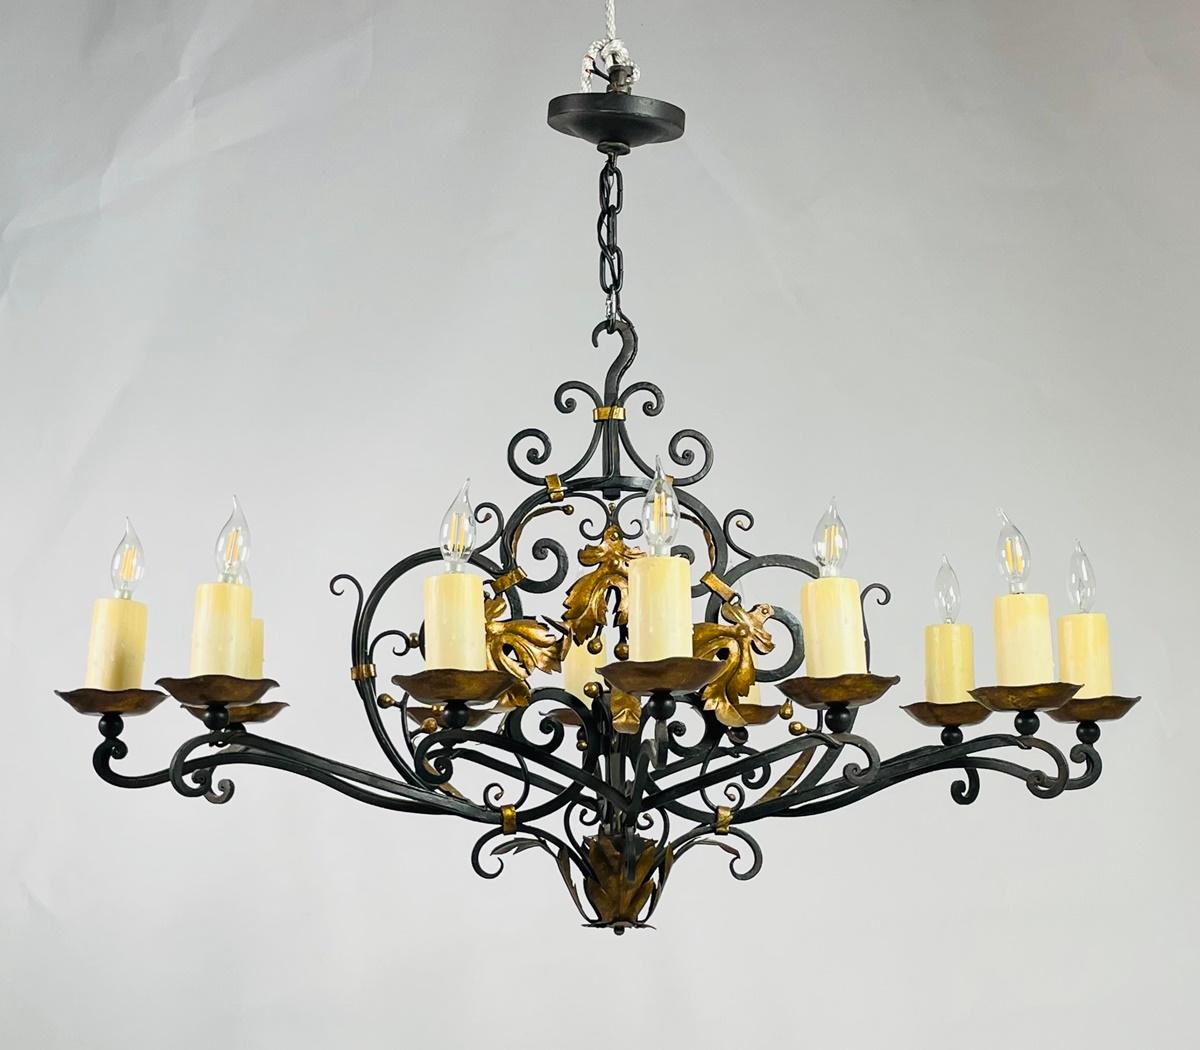 Wrought Iron & Gold Gilt Chandelier by Paul Ferrante, USA 2016 For Sale 4